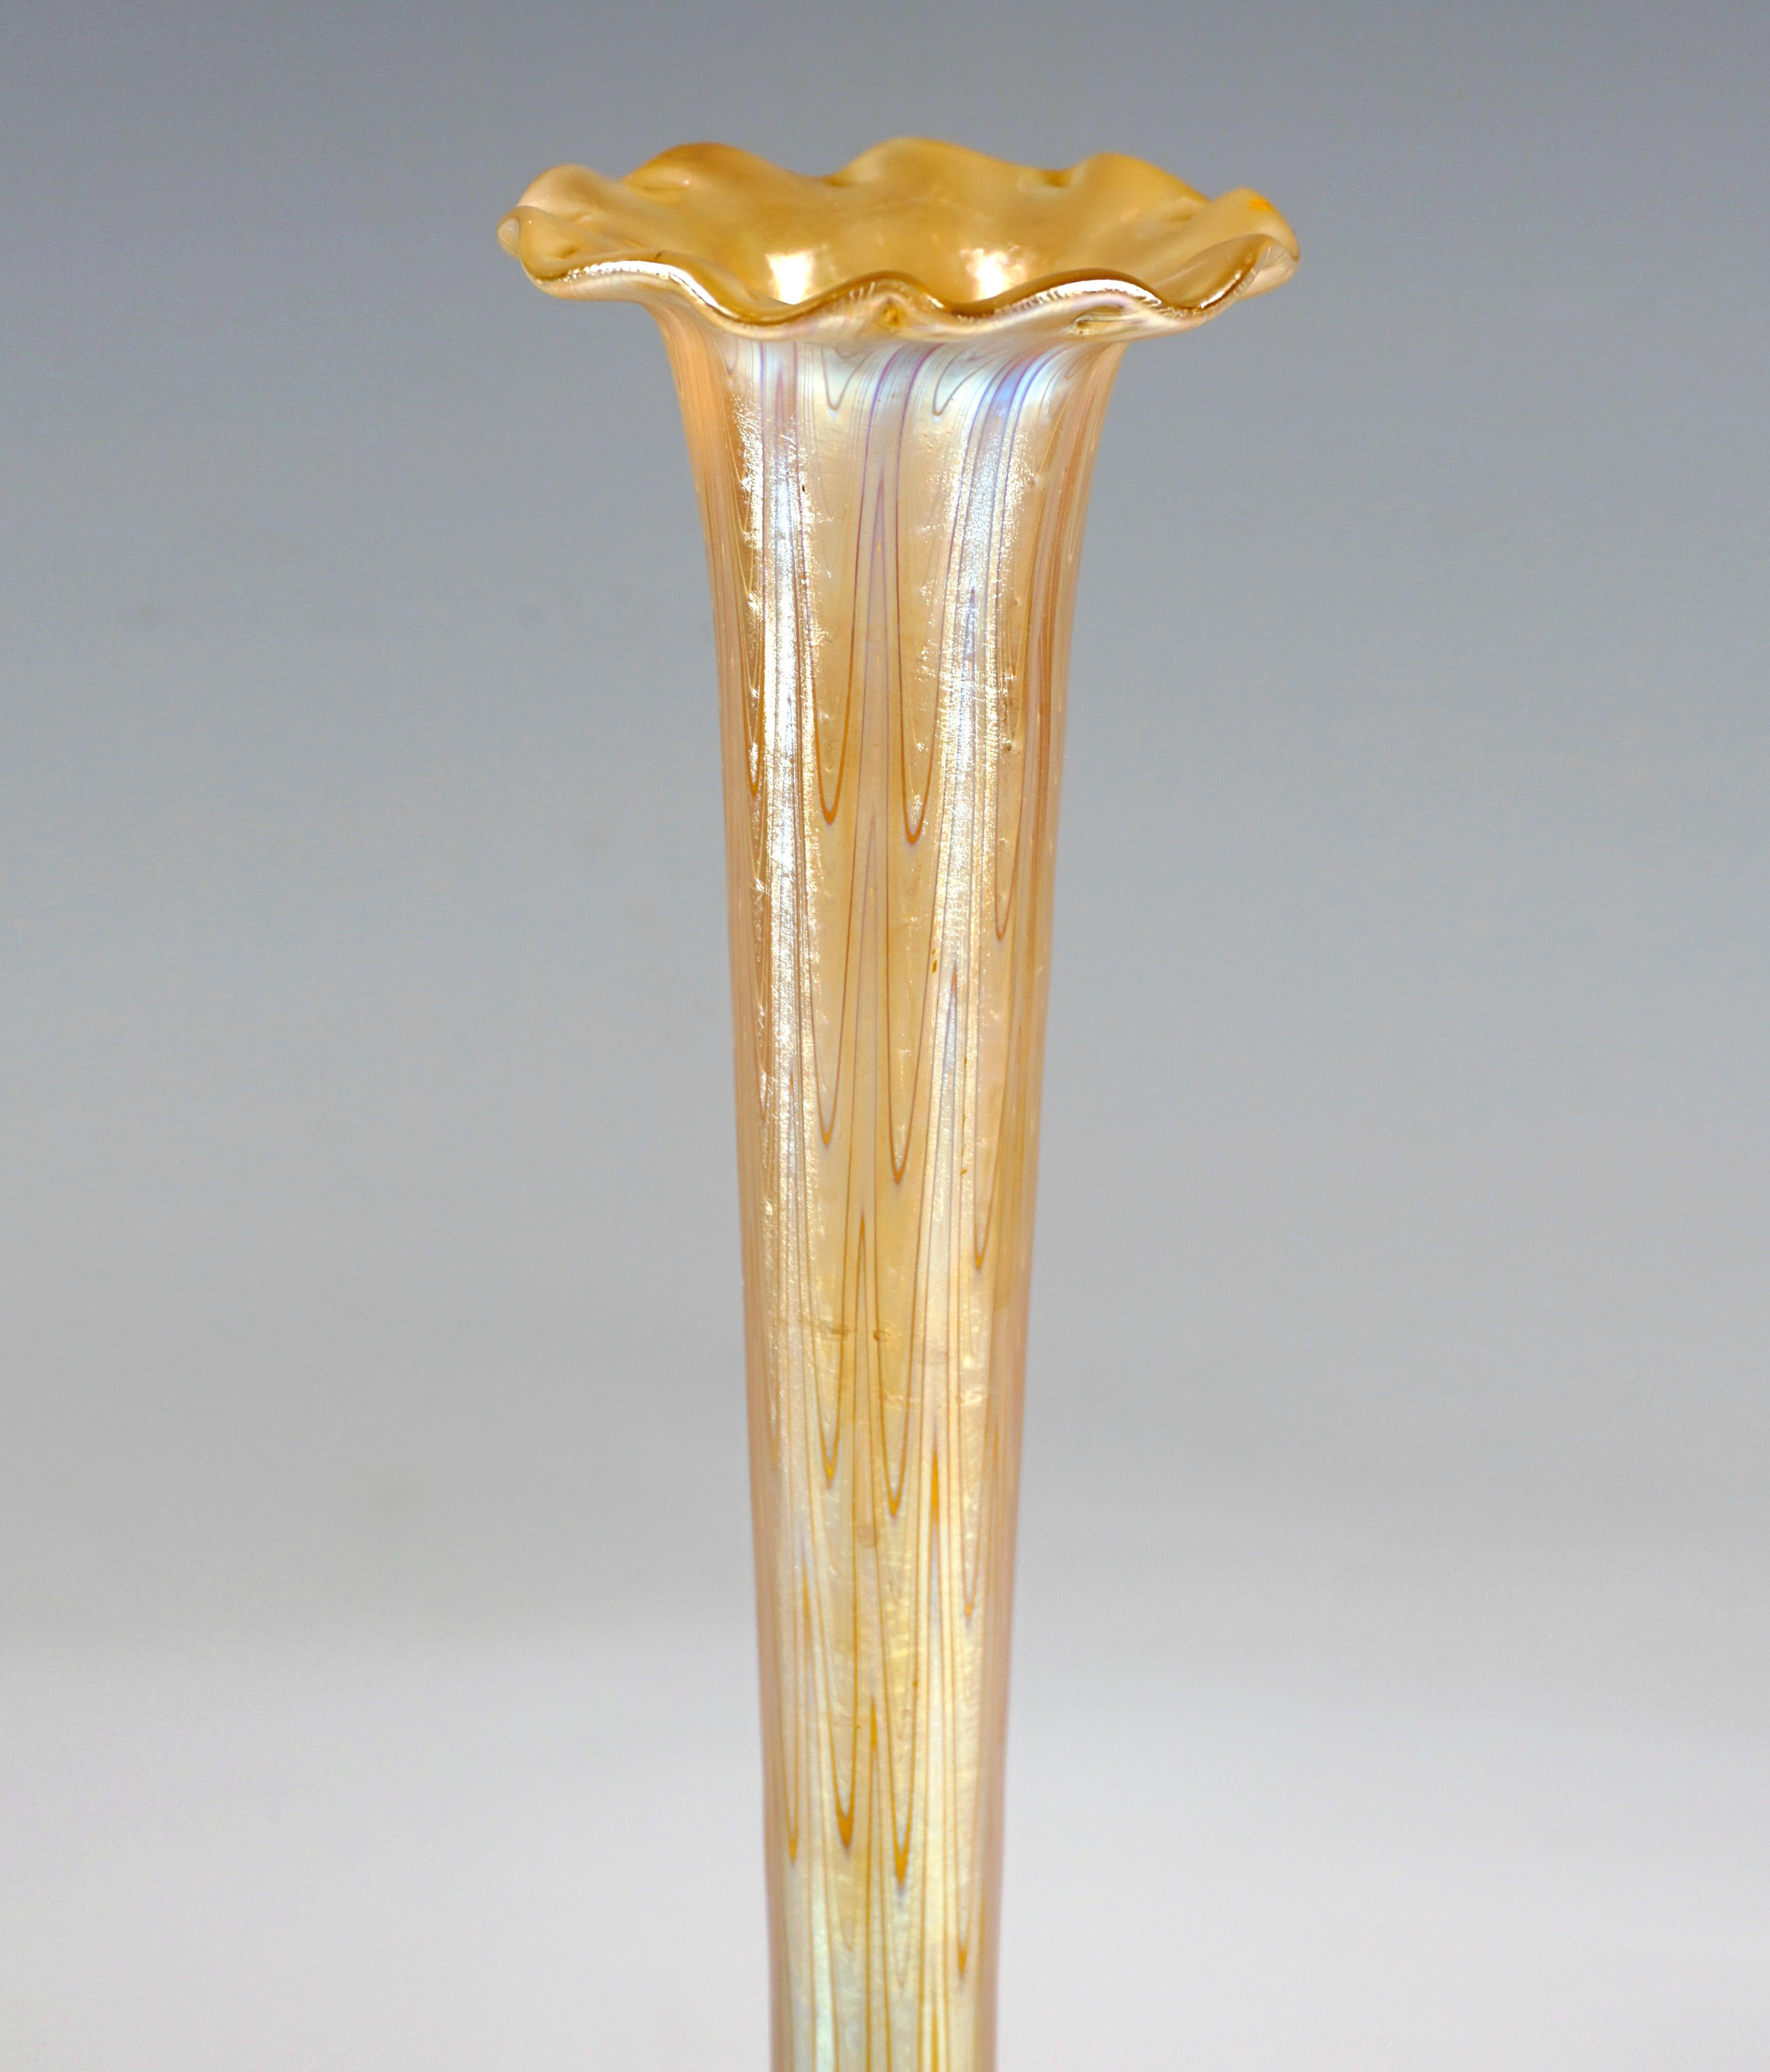 Finest Bohemian Art Nouveau glass vase:
Mold-blown, disc-shaped body on a flush stand with raised, slender, trumpet-shaped, widening neck, flatened, 10-times wave-shaped mouth rim, slightly concave inwardly curved base with ground, polished